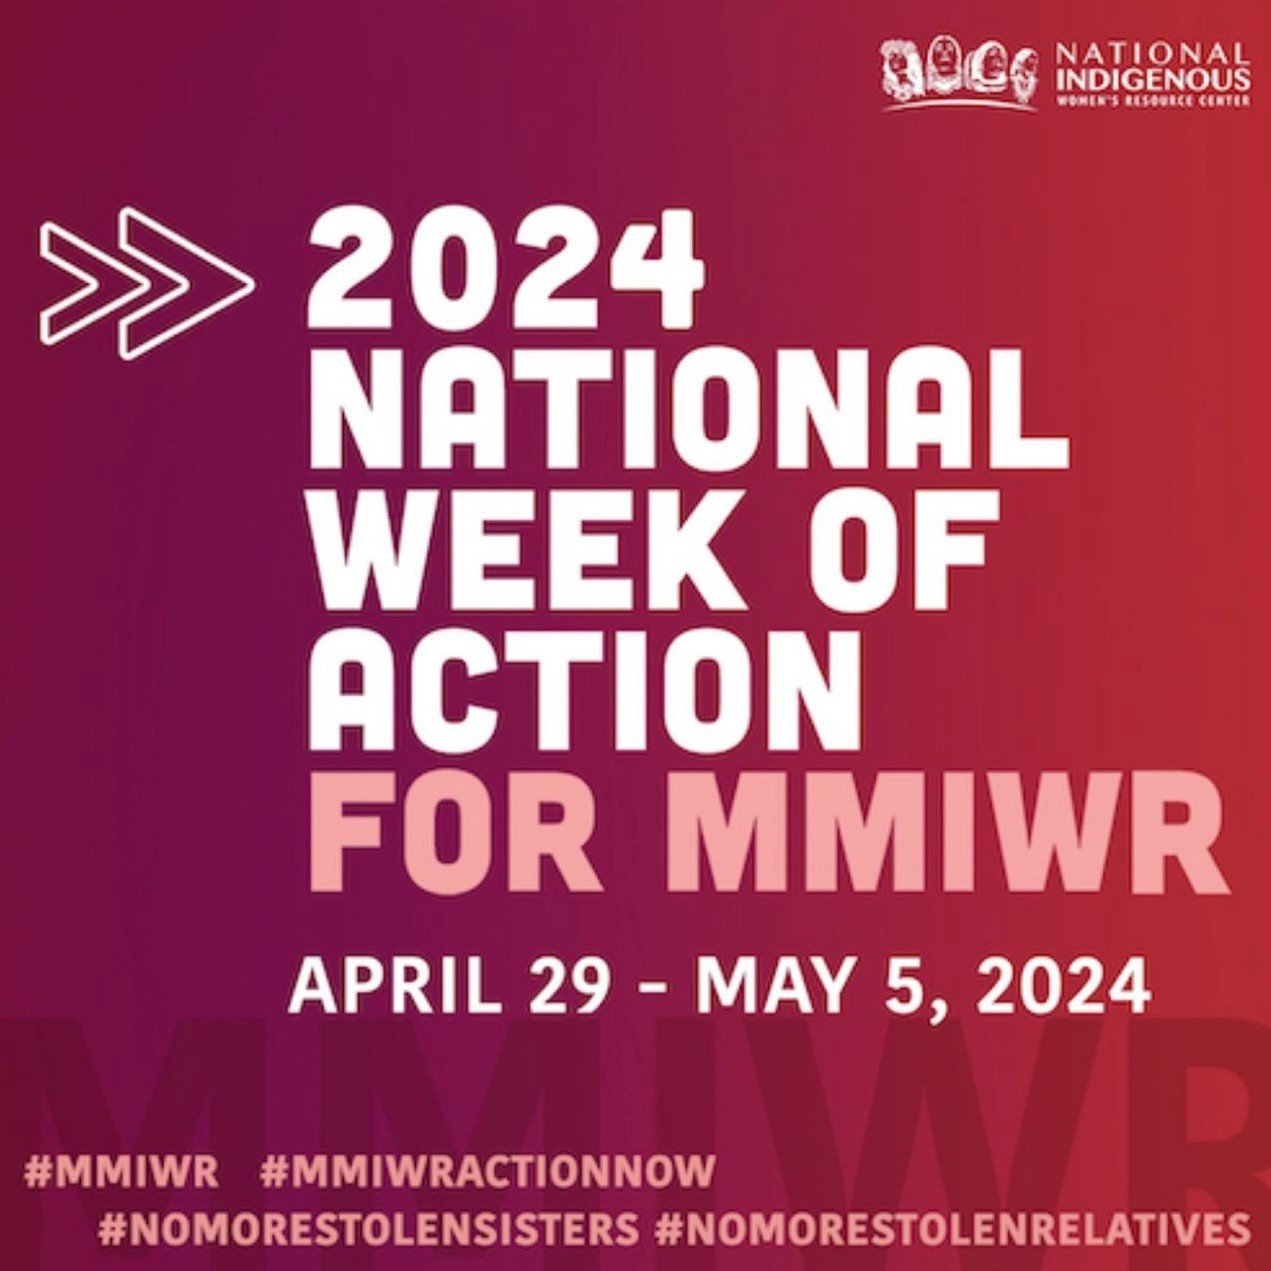 REPOST @indigenouspridela @niwrc⁠
⁠
April 29 - May 5, 2024, is the National Week of Action for Missing and Murdered Indigenous Women and Relatives (MMIWR). Learn about MMIR and take action by participating throughout the week, exploring NIWRC&rsquo;s